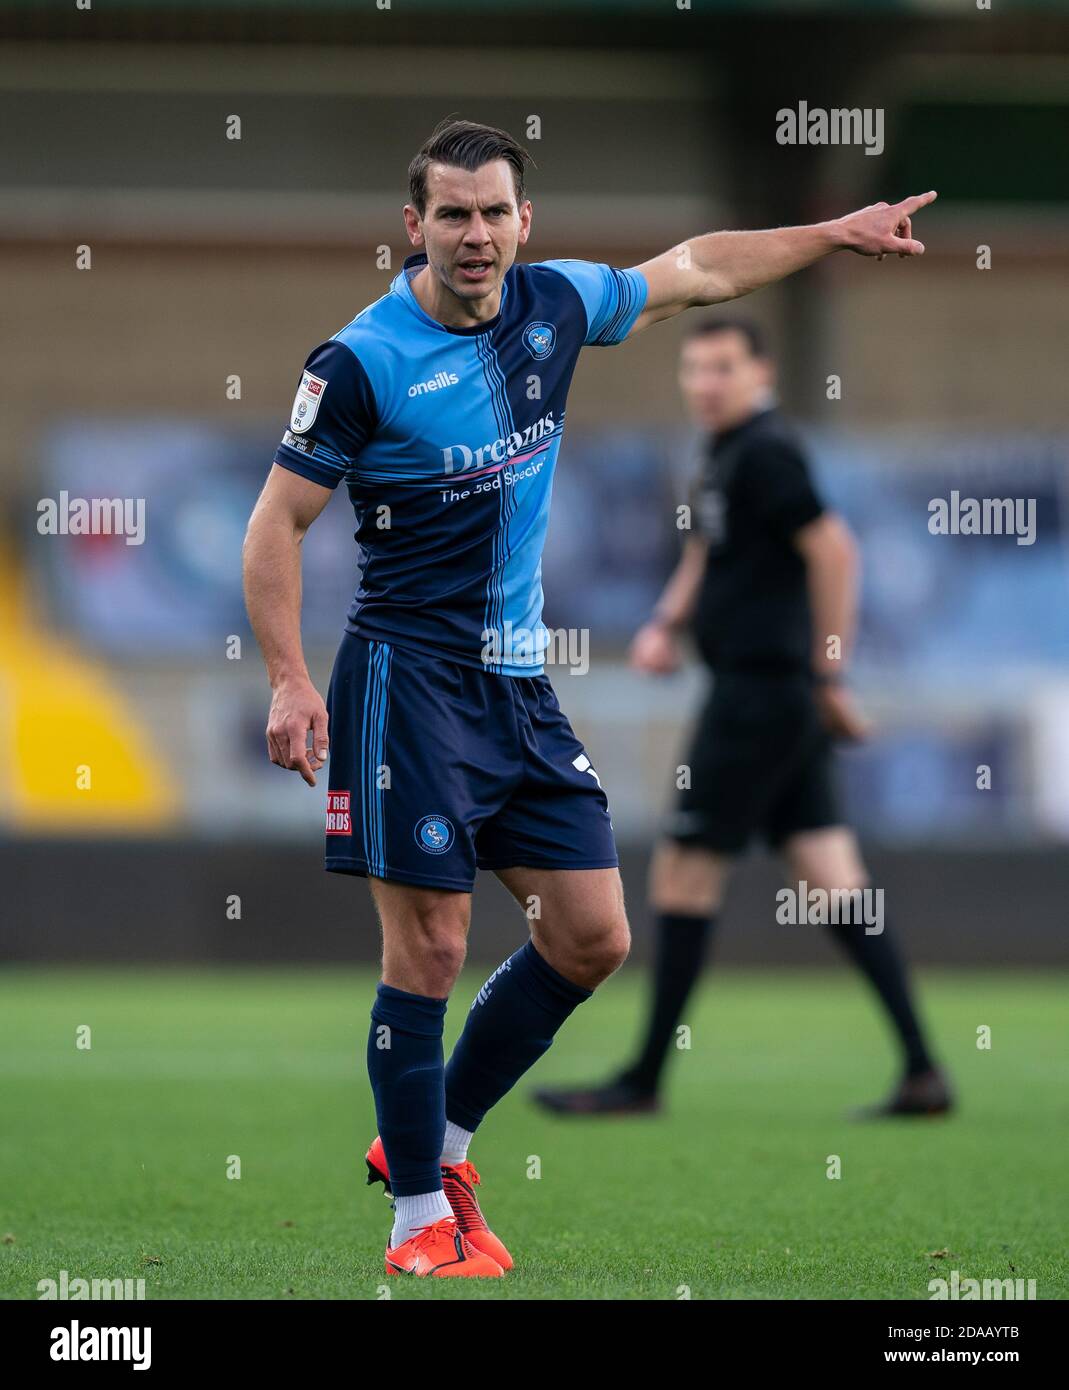 Matt Bloomfield of Wycombe Wanderers during the 2020/21 Friendly match played behind closed doors between Wycombe Wanderers and AFC Bournemouth at Adams Park, High Wycombe, England on 10 November 2020. Photo by Andy Rowland. Stock Photo